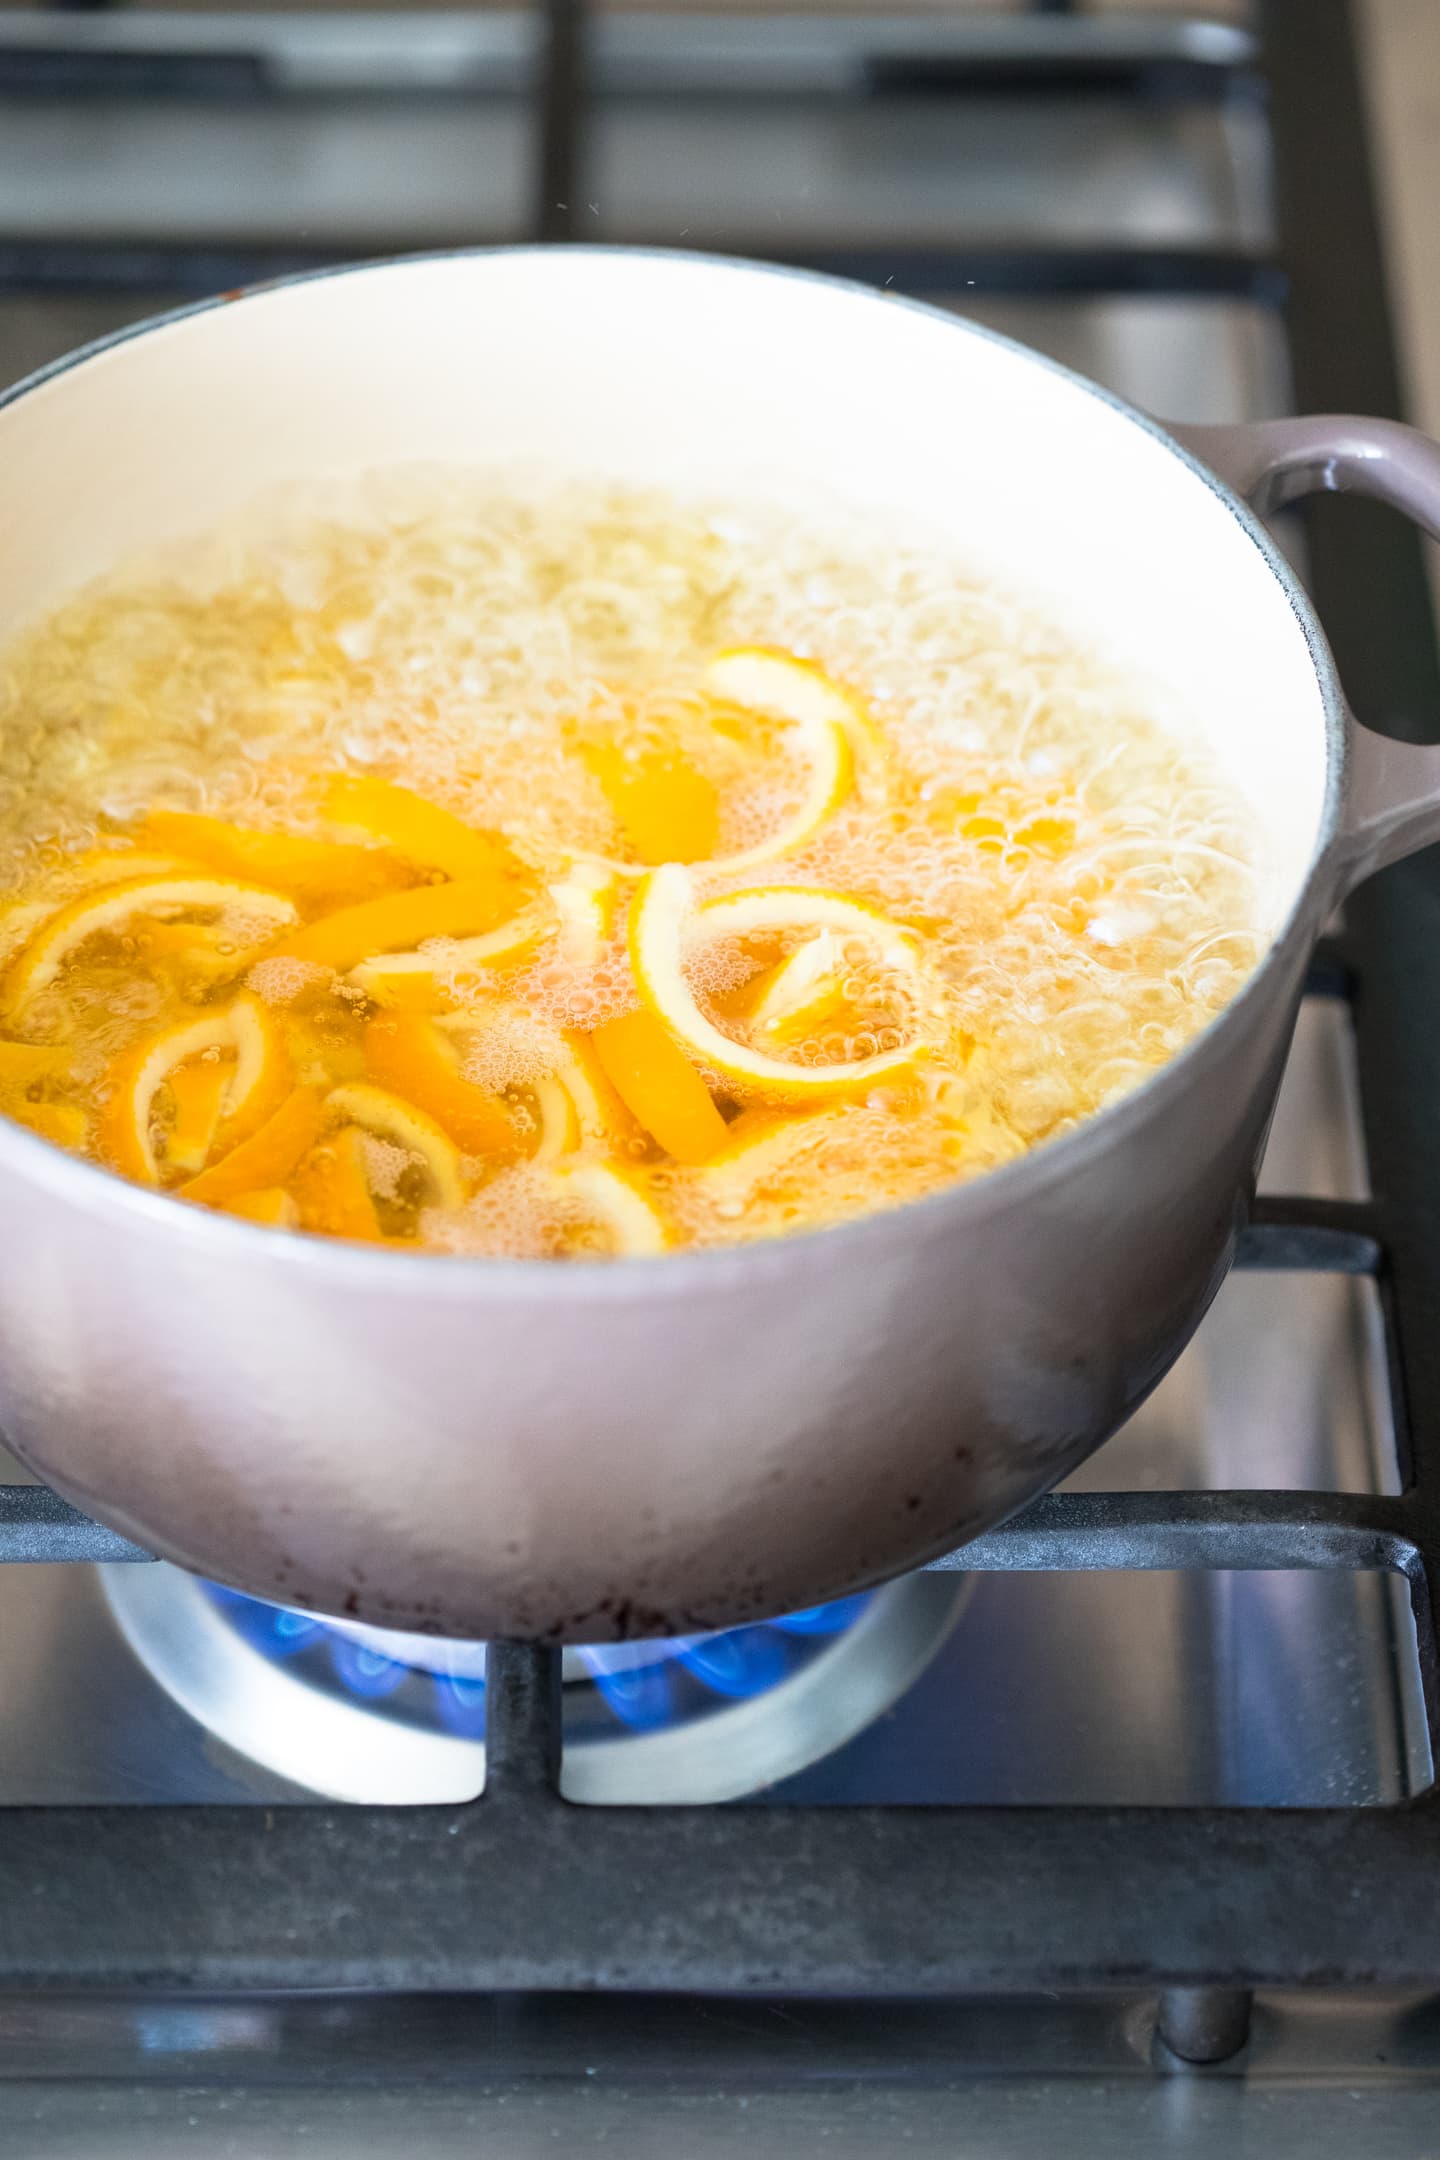 Angled view of orange peels being balanced in a pot on the stove.